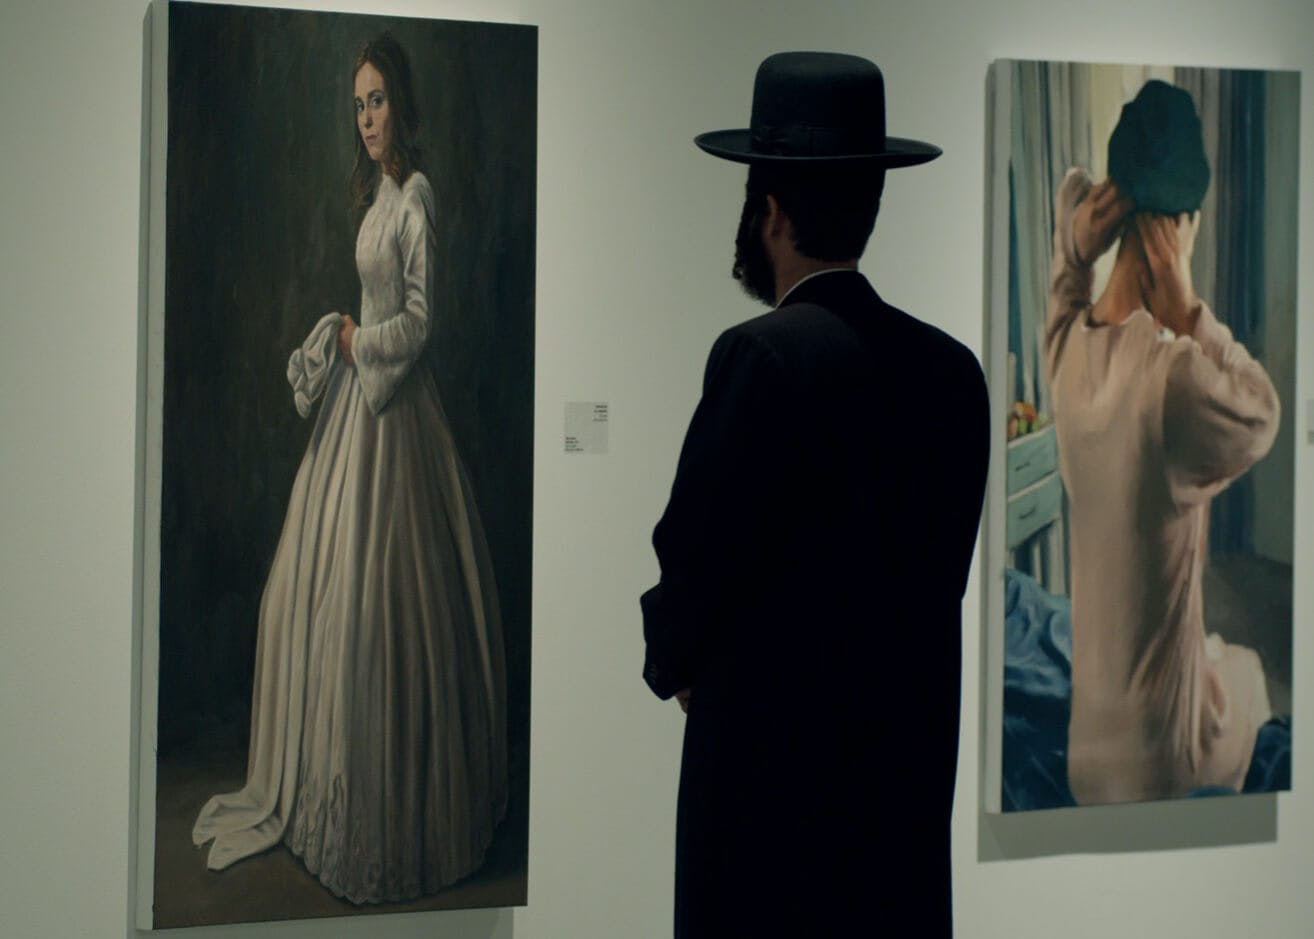 A man stares at two paintings. He wears all black, including a black hat. The painting closer to the man is a woman in a long white dress against a black background. The further painting is a person in white sitting on a blue bed adjusting their hair. There is a turquoise piece of furniture in the background.